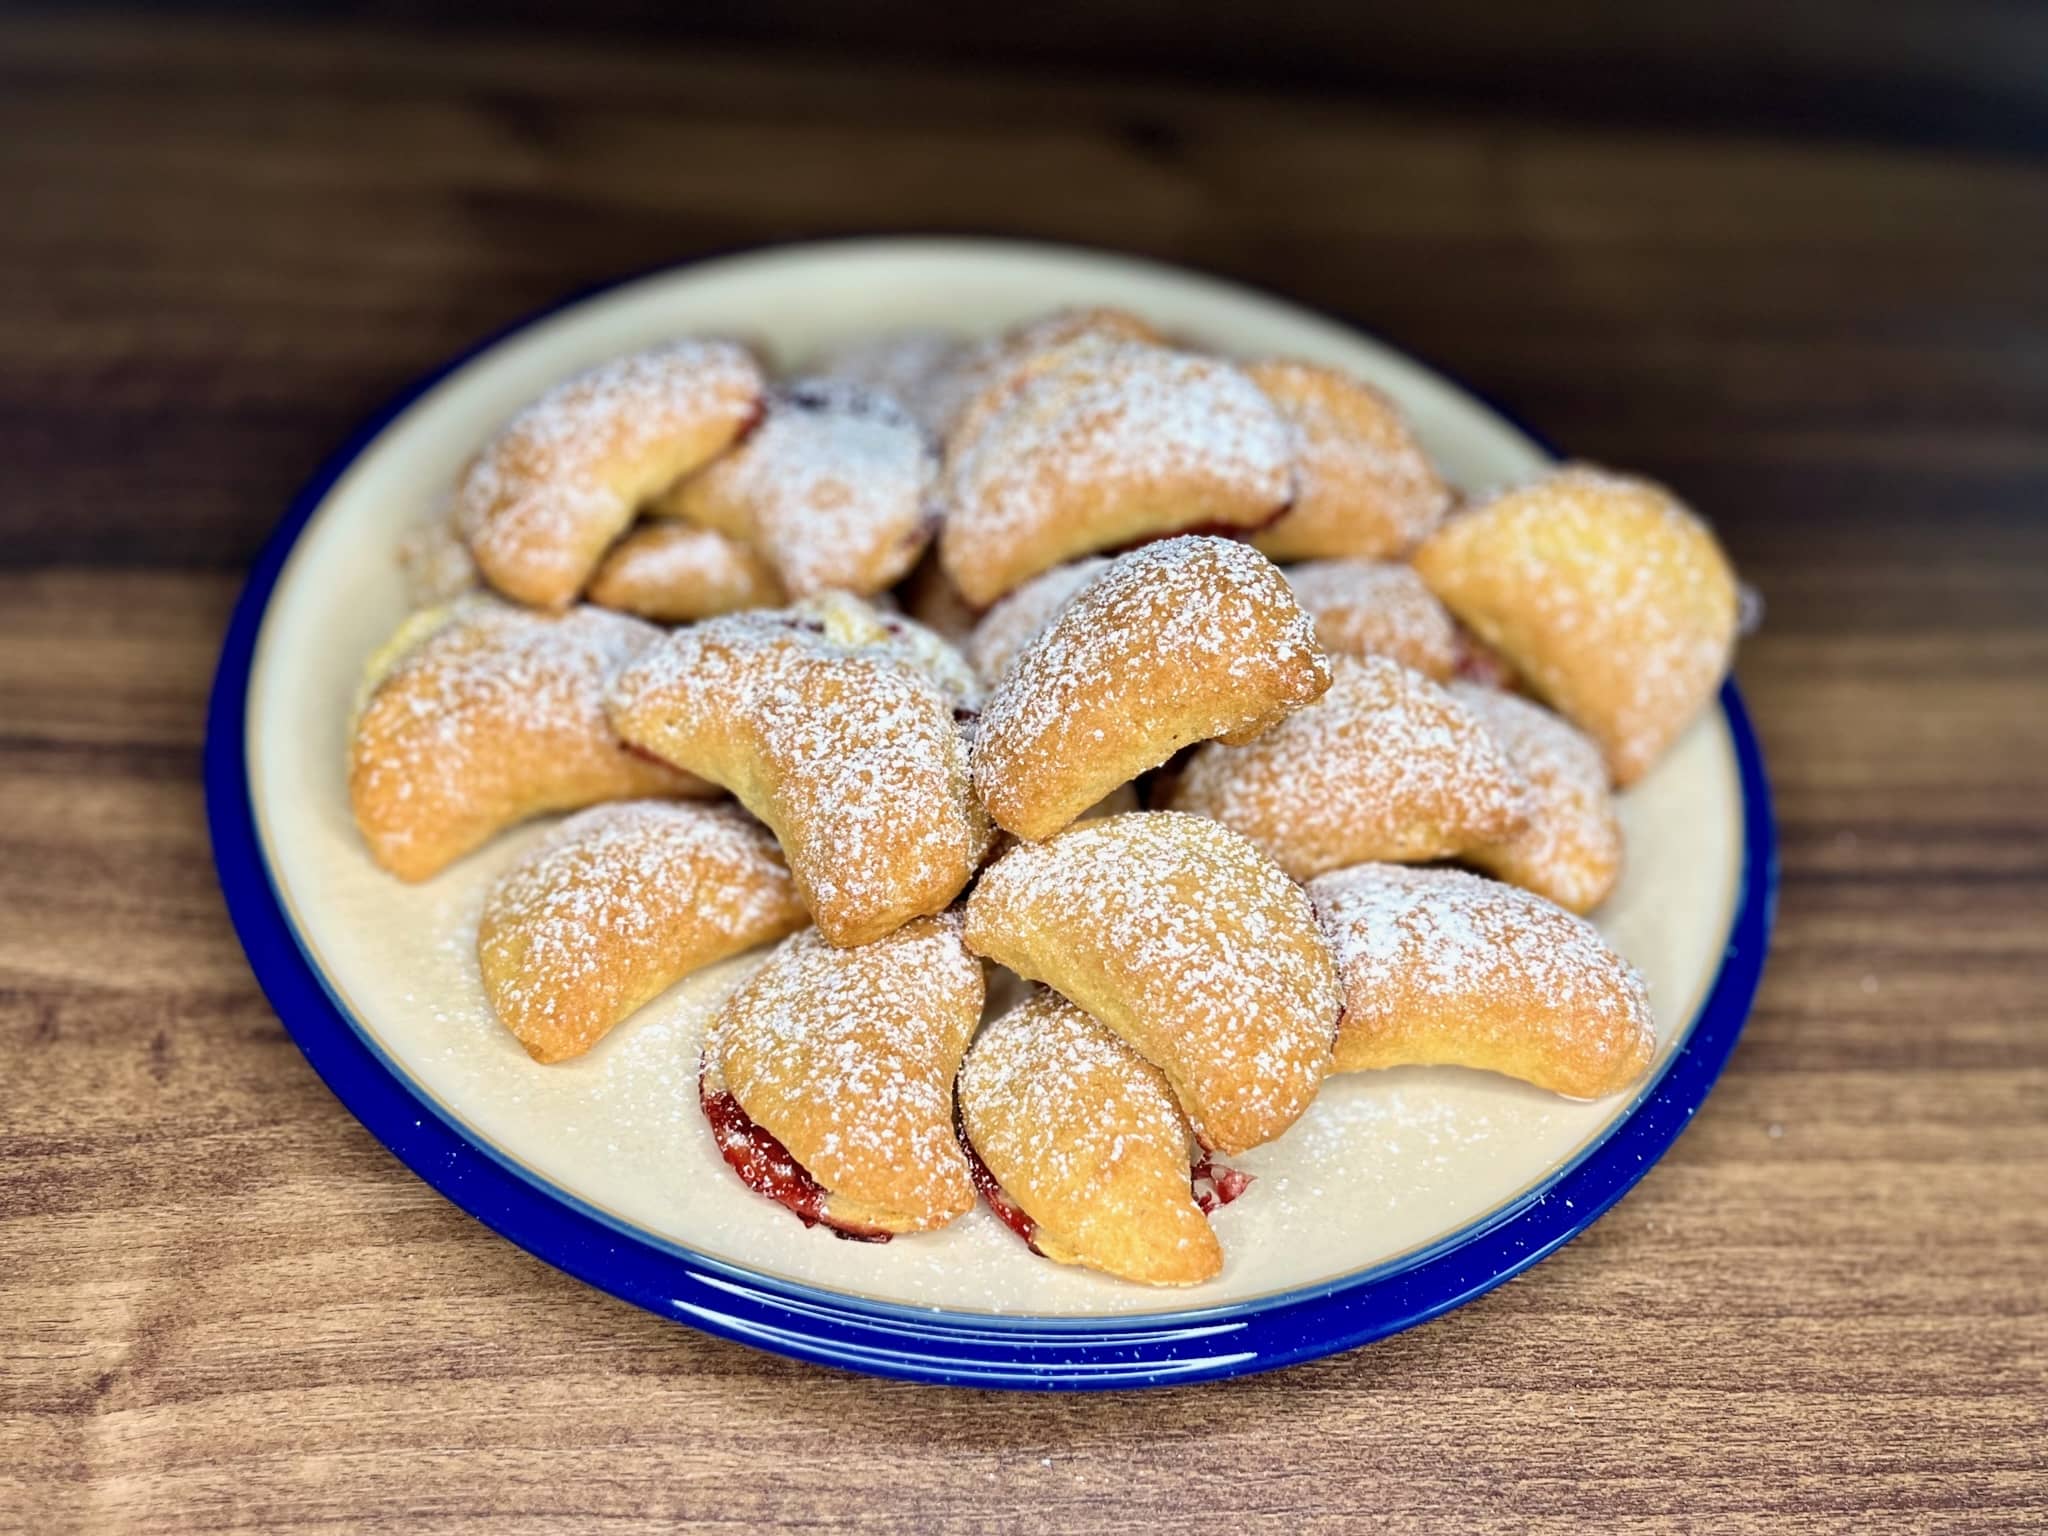 Crispy Cookies with Jam dusted with icing sugar on a plate